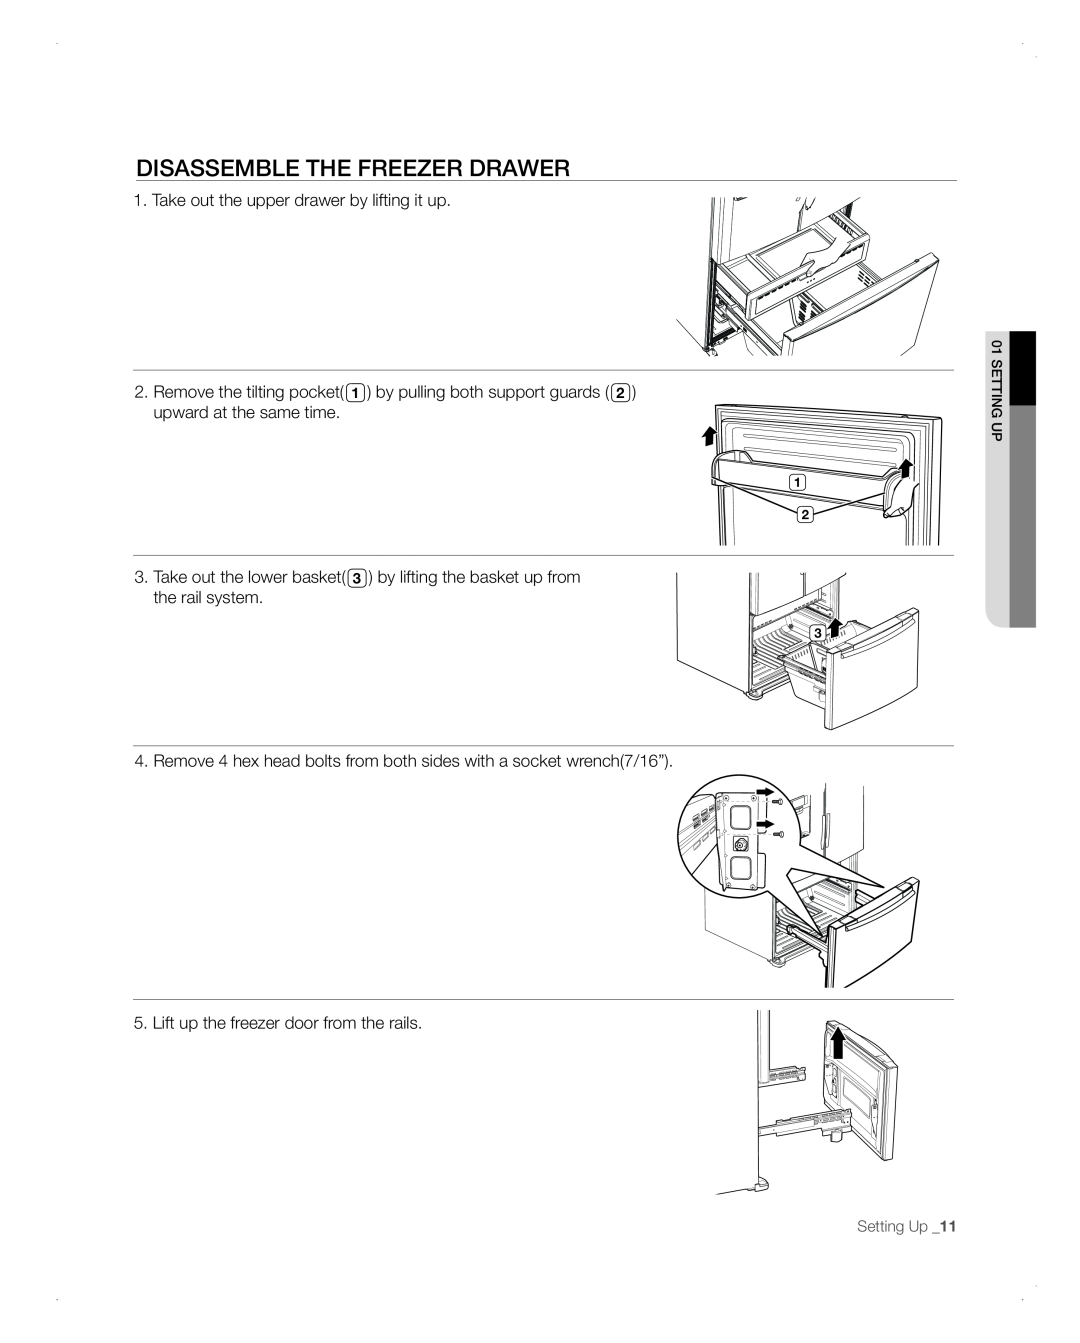 Samsung RFG298AARS user manual disassemble the freezer drawer, Take out the upper drawer by lifting it up, Setting Up 